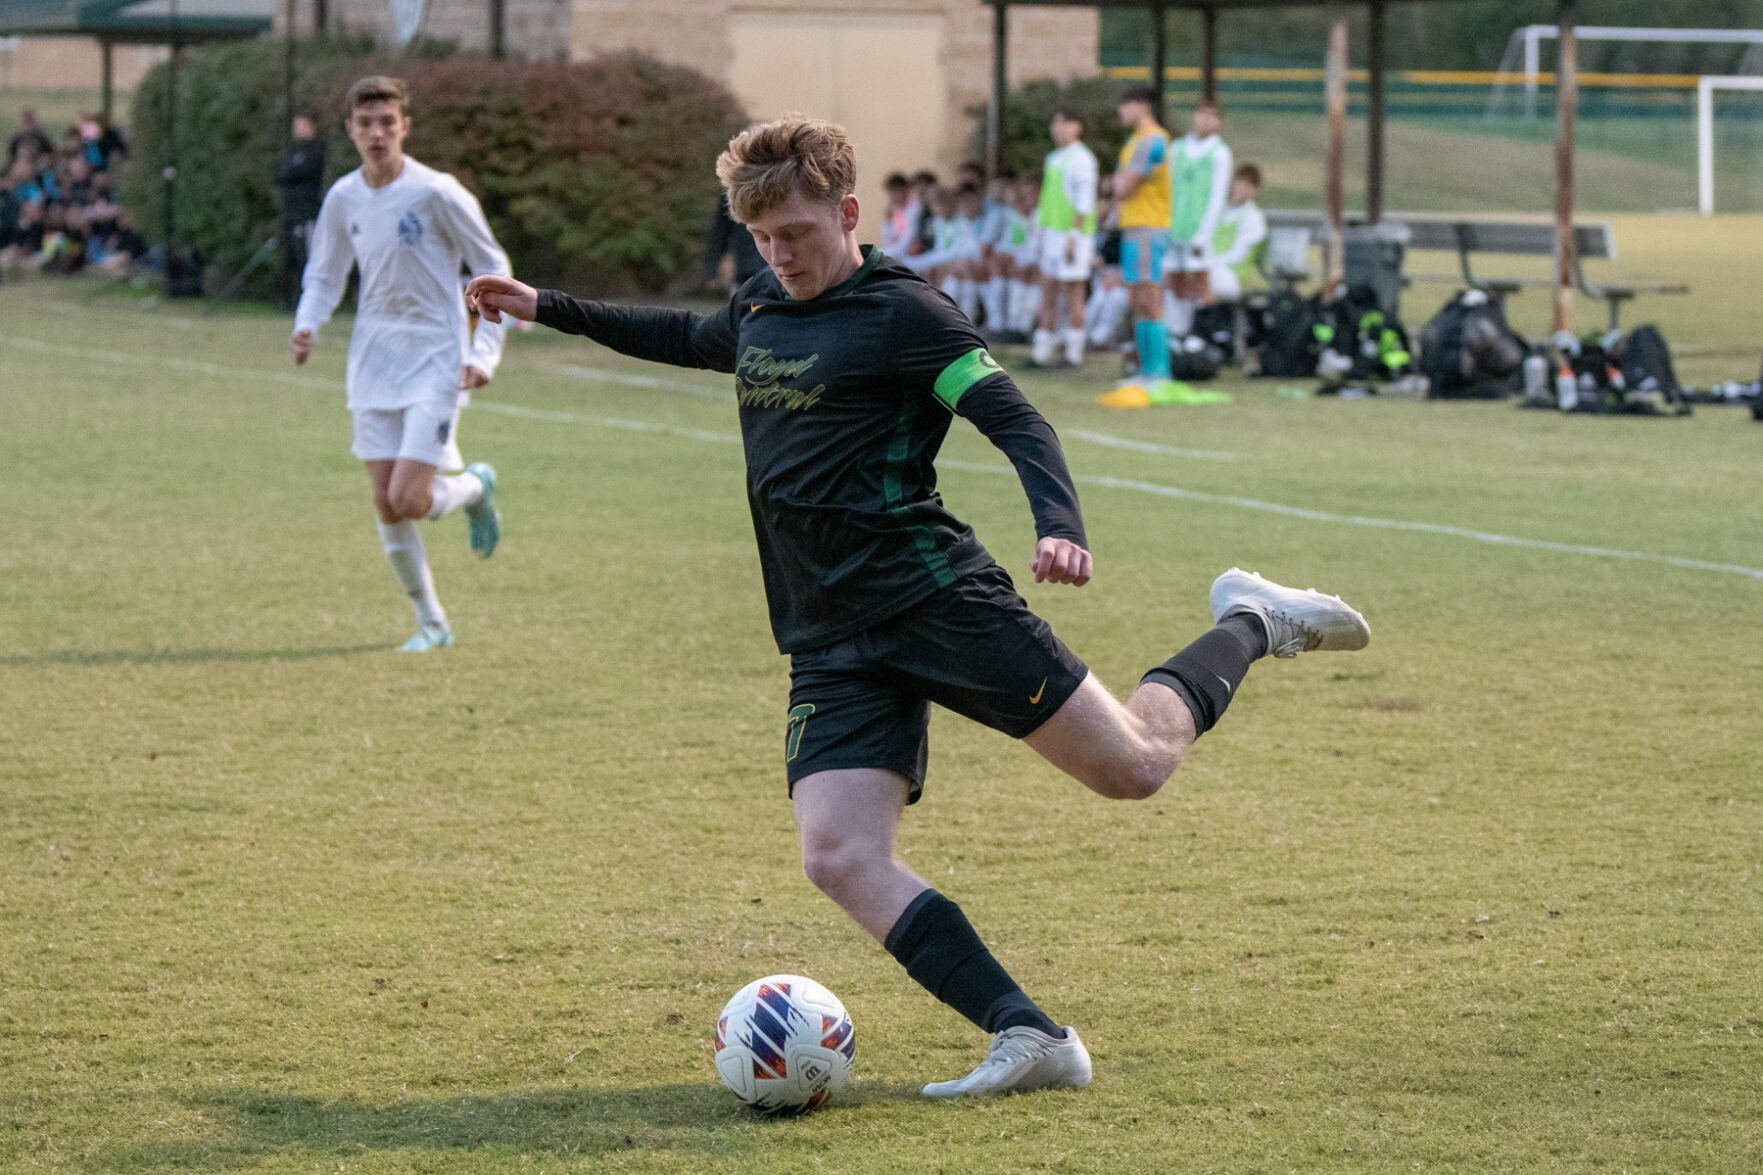 NTSPY Boys Soccer Player of the Year Finalists Revealed for June 18 Awards Ceremony